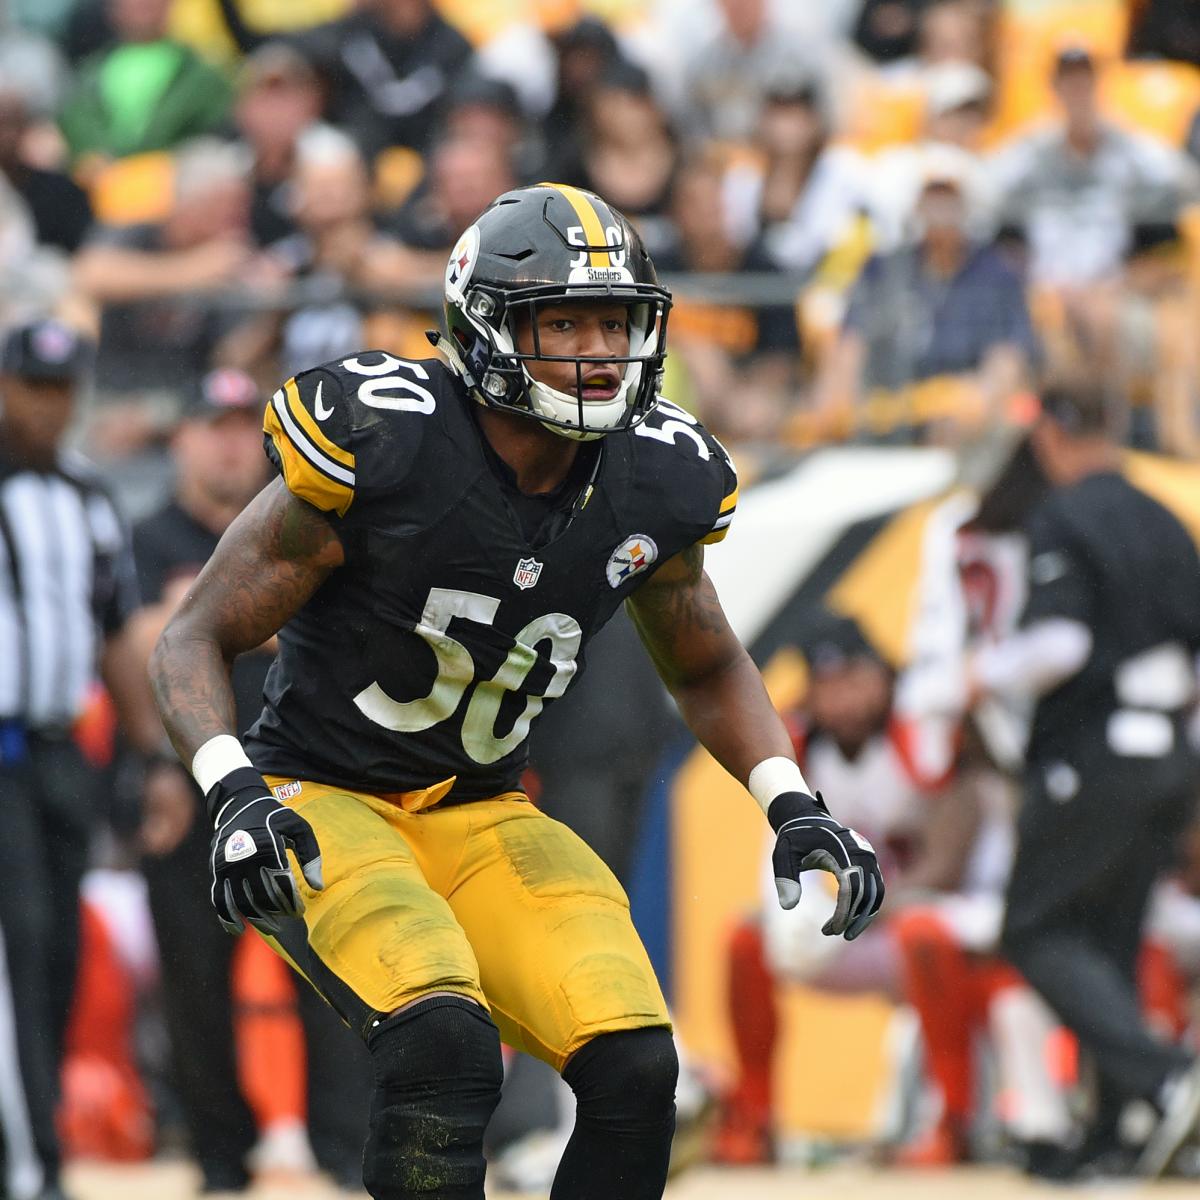 Ryan Shazier Carted Off Field, Taken to Hospital with Back 